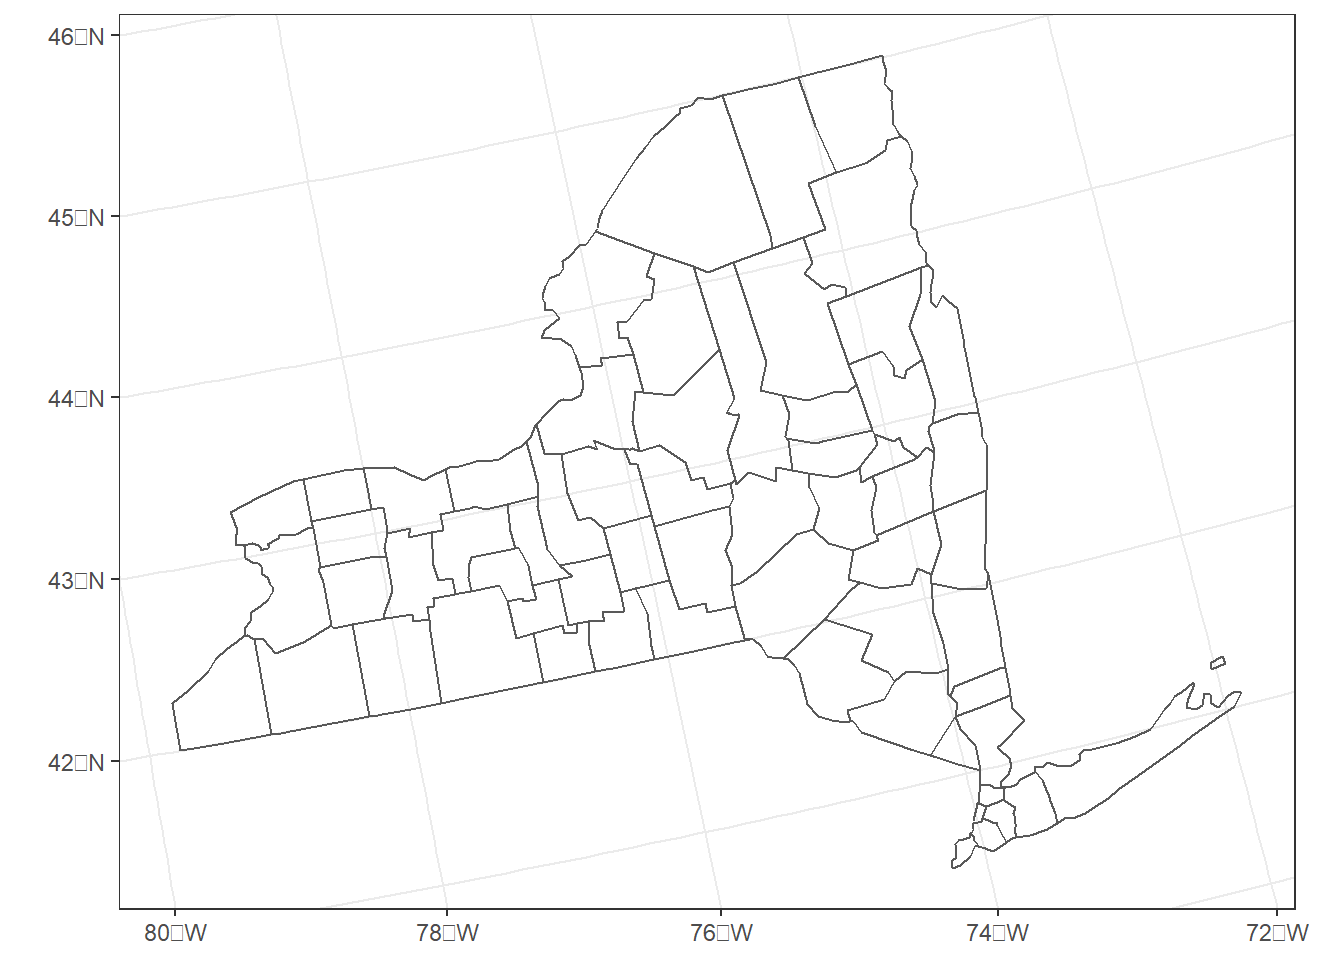 New York counties in an Albers Equal Area coordinate system for the conterminous United States.